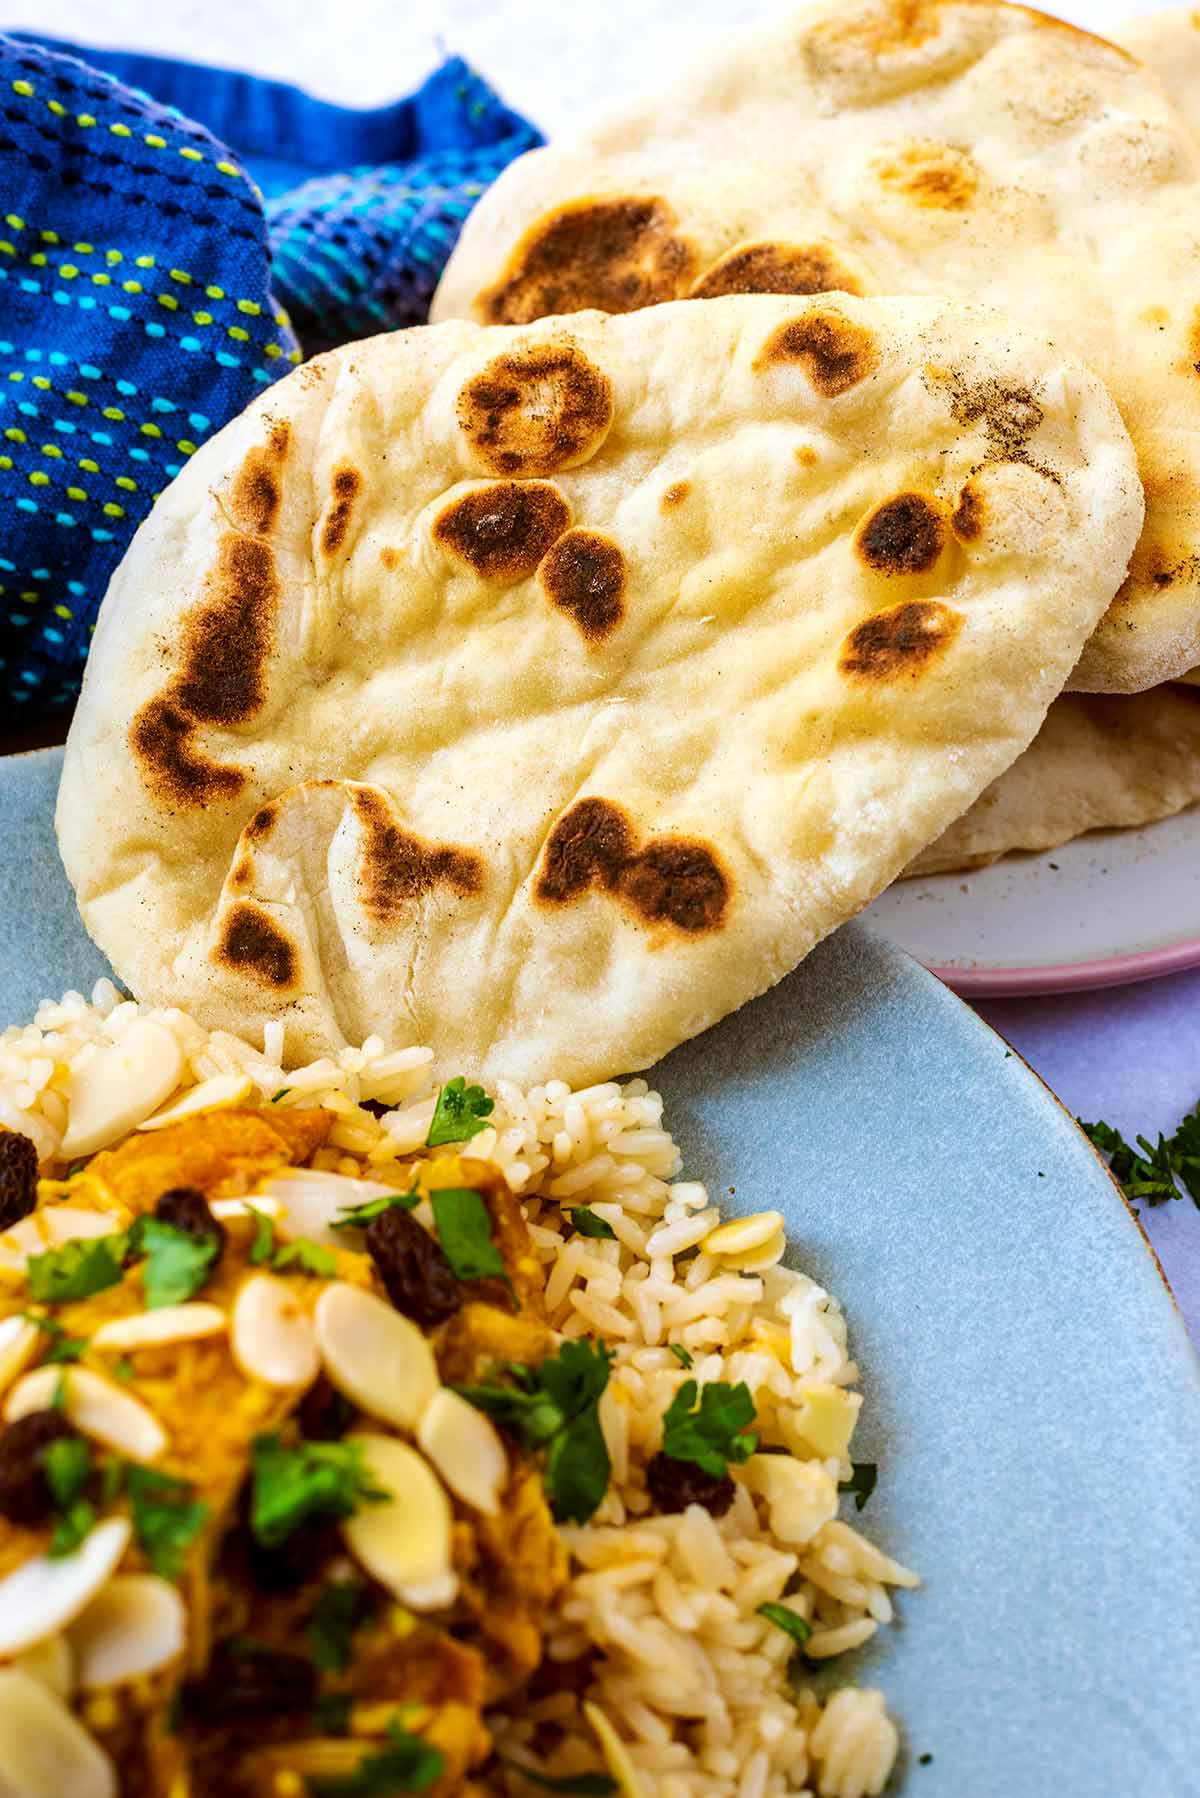 A naan bread on a plate with some curry and rice.